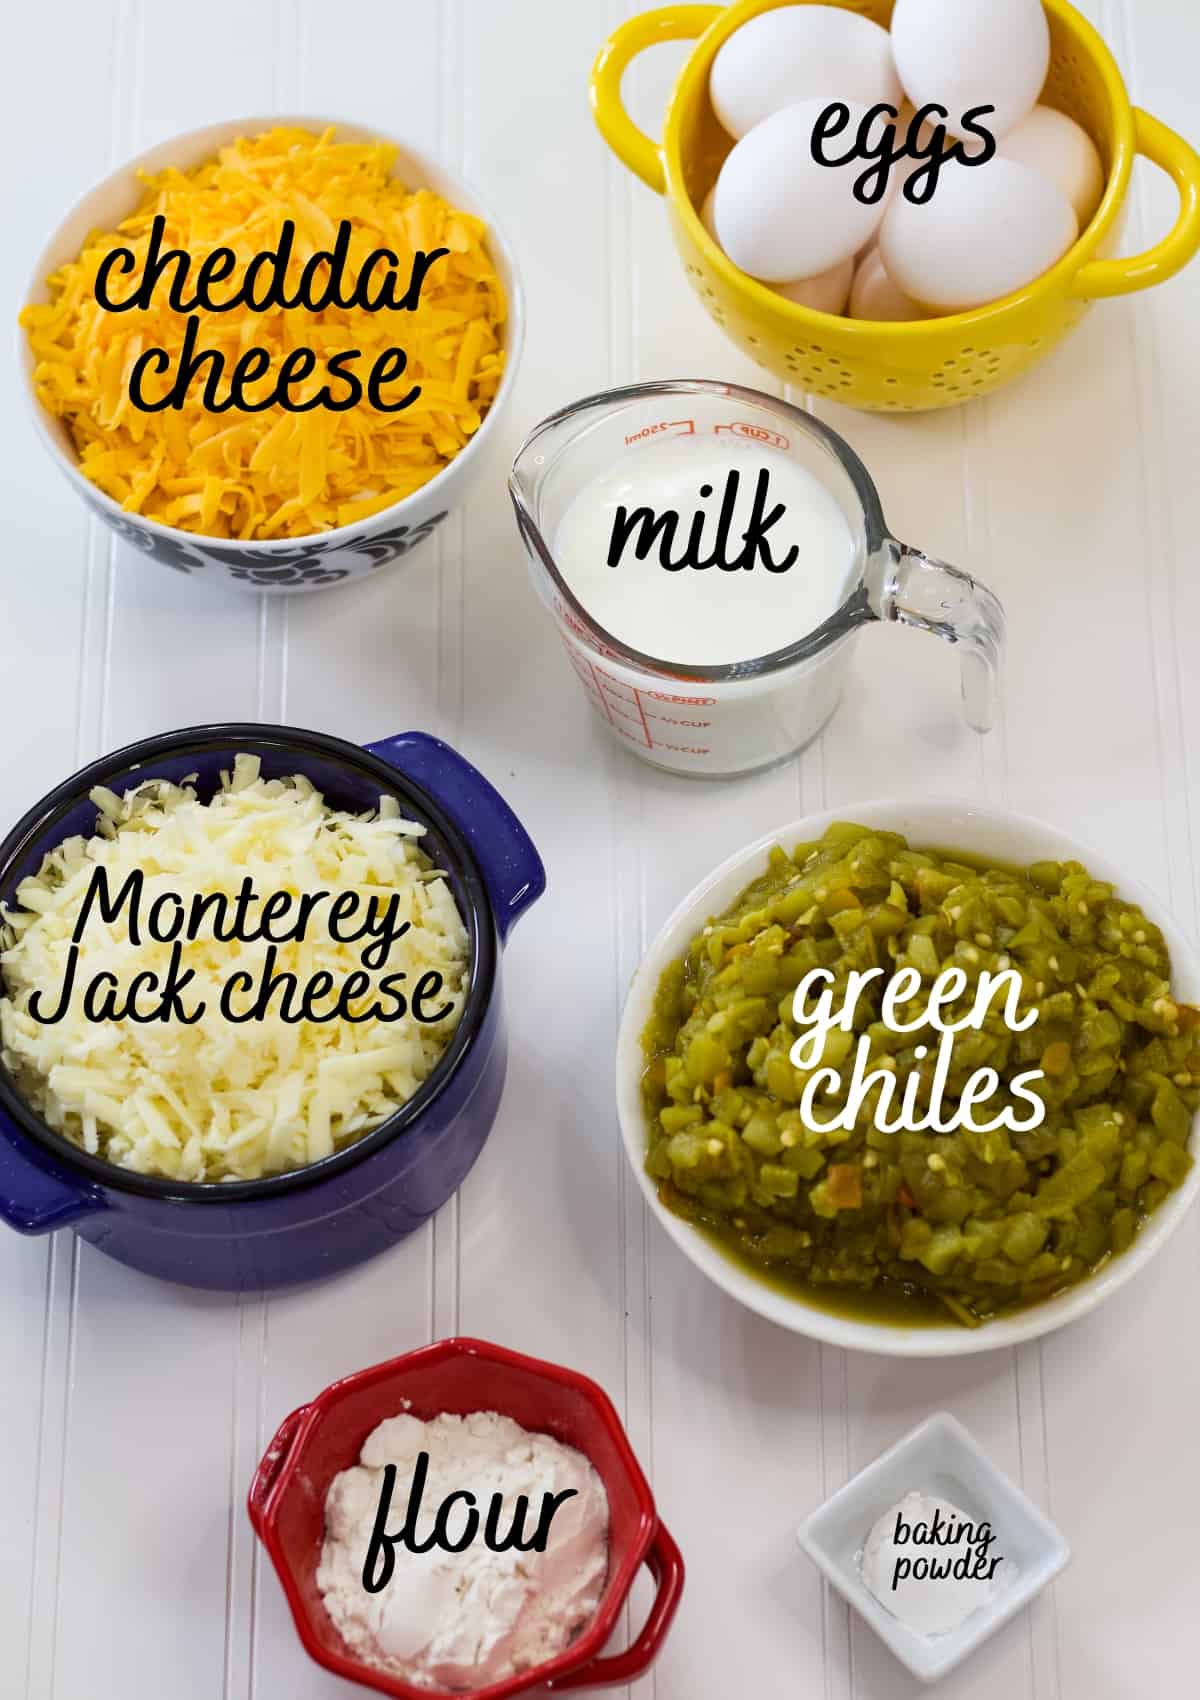 All of the ingredients needed to make the easy hatch chile rellenos casserole recipe with text over each ingredient.